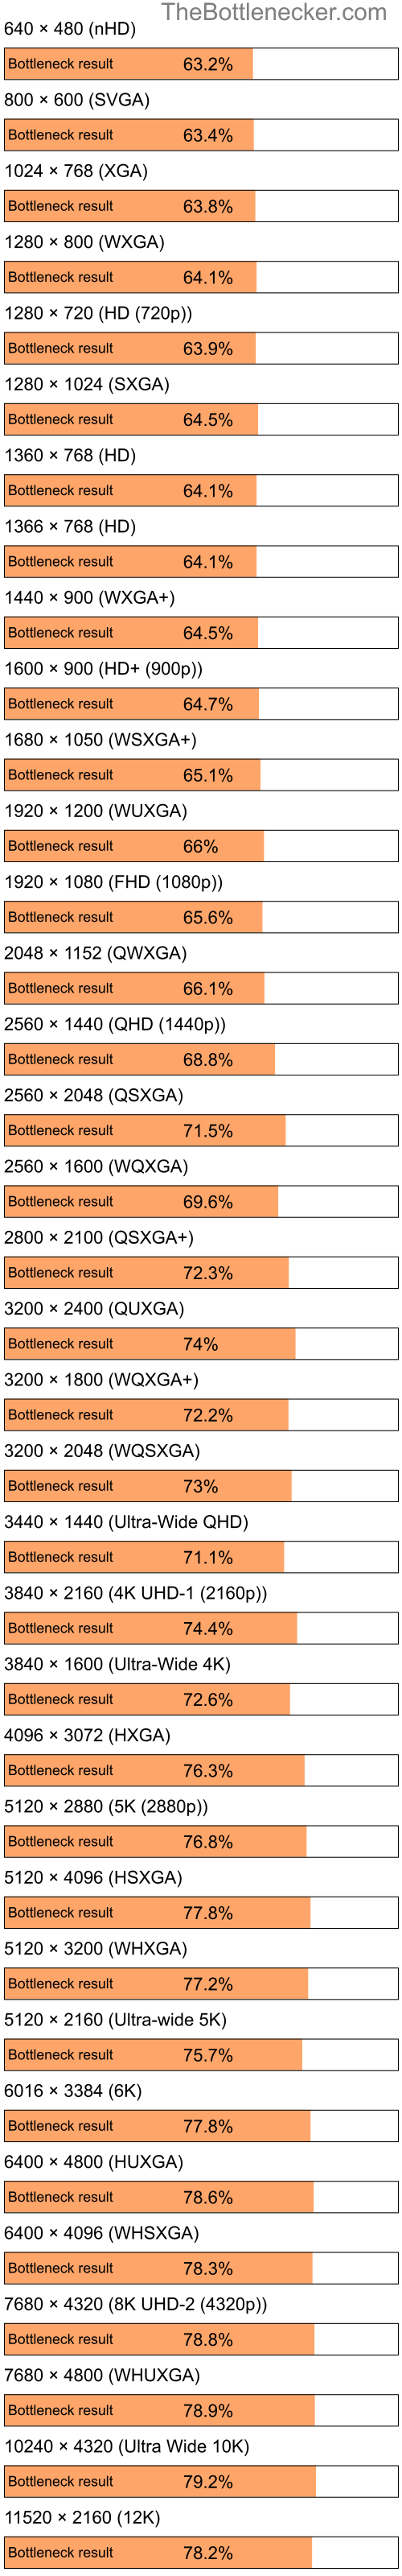 Bottleneck results by resolution for Intel Pentium 4 and NVIDIA GeForce 7500 LE in General Tasks